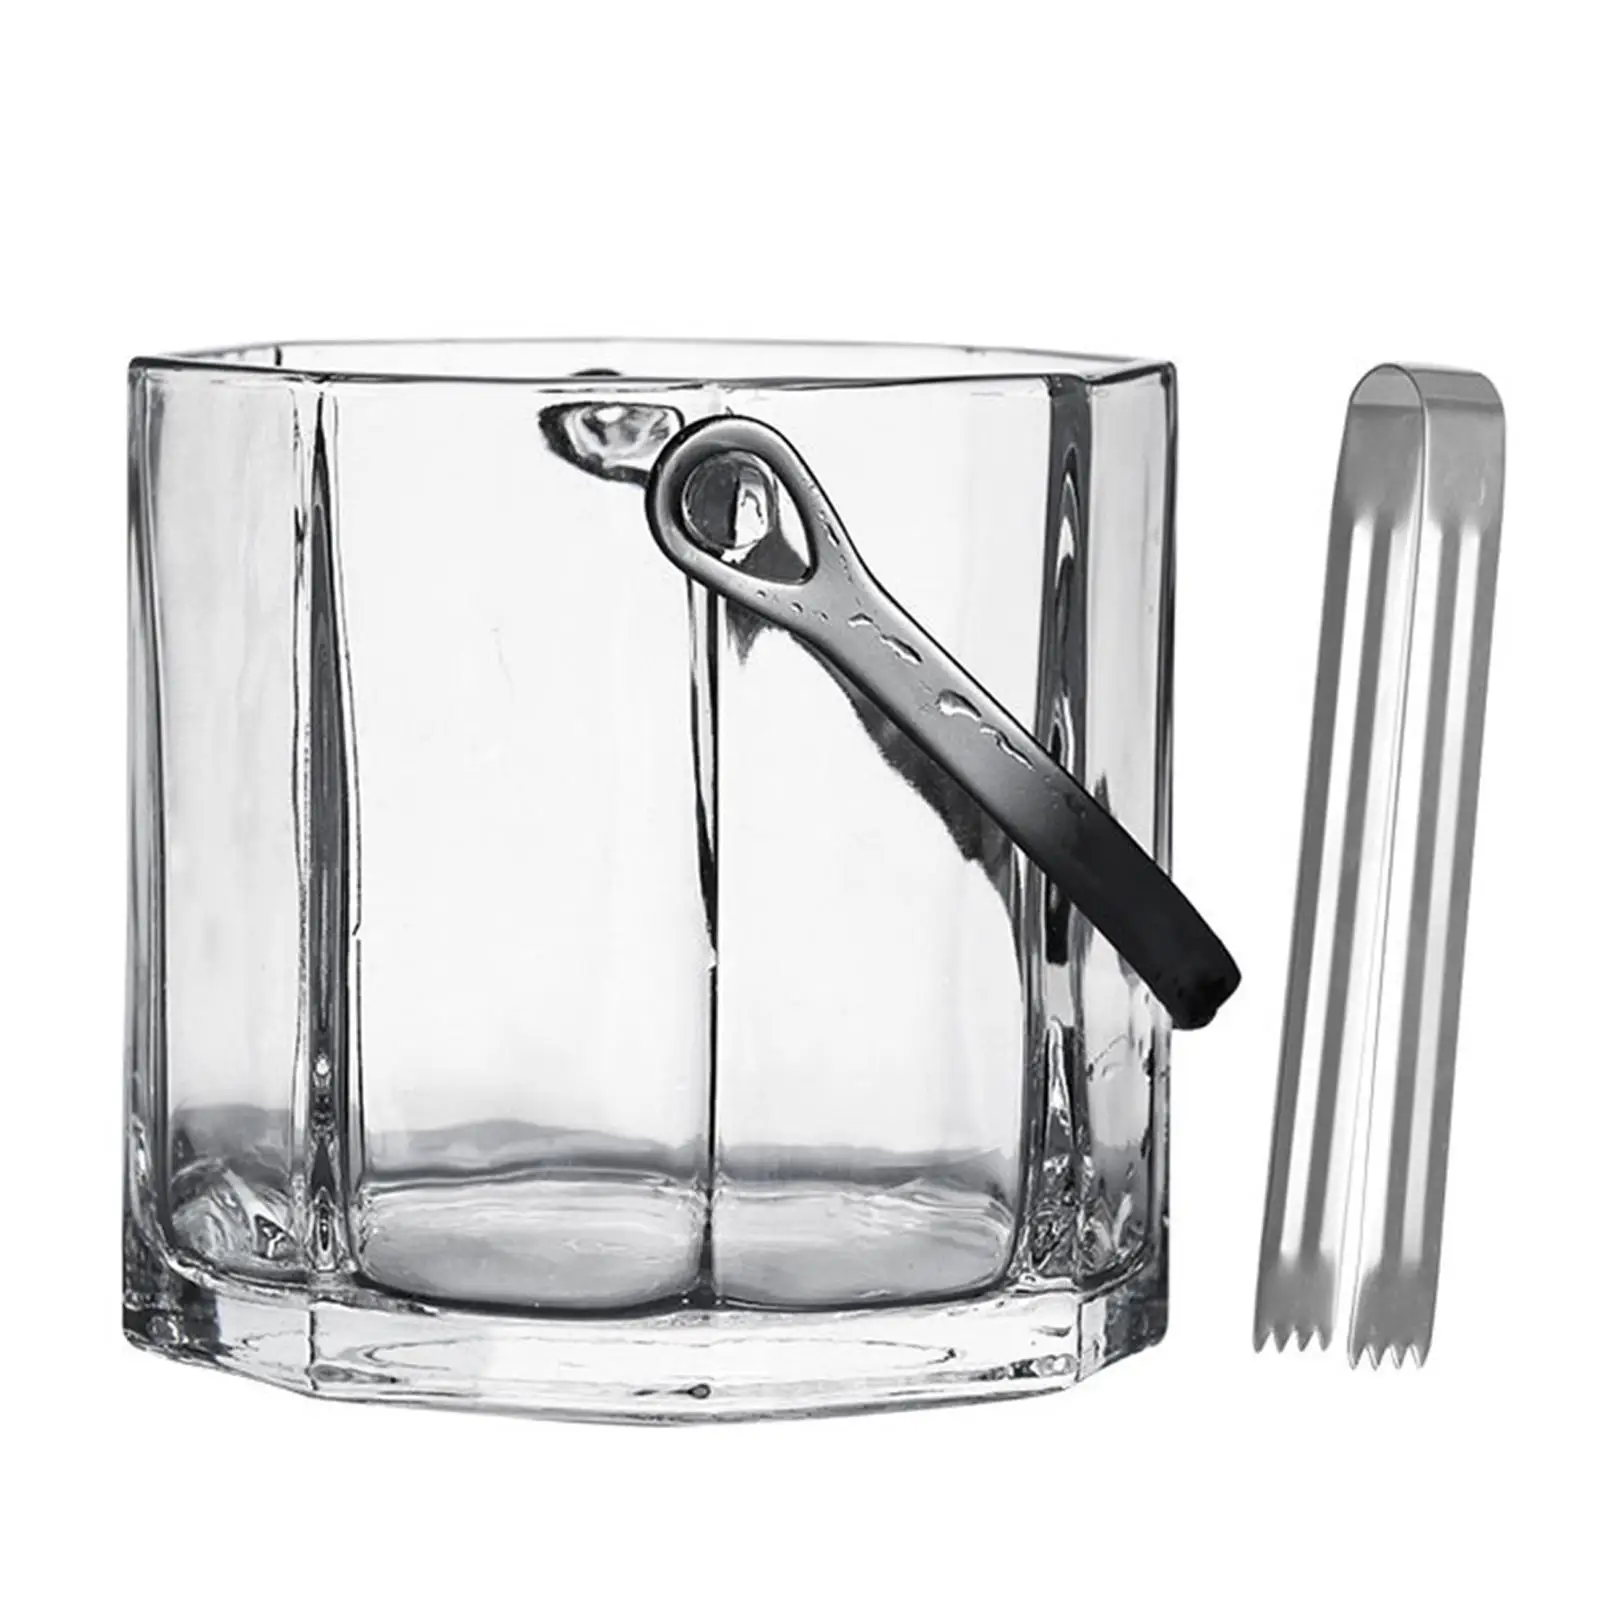 Ice Bucket Transparent Cooling Tool Beverage Chilling Tub with Ice Clip for Bars Freezer Cocktail Champagne Accessory Decor